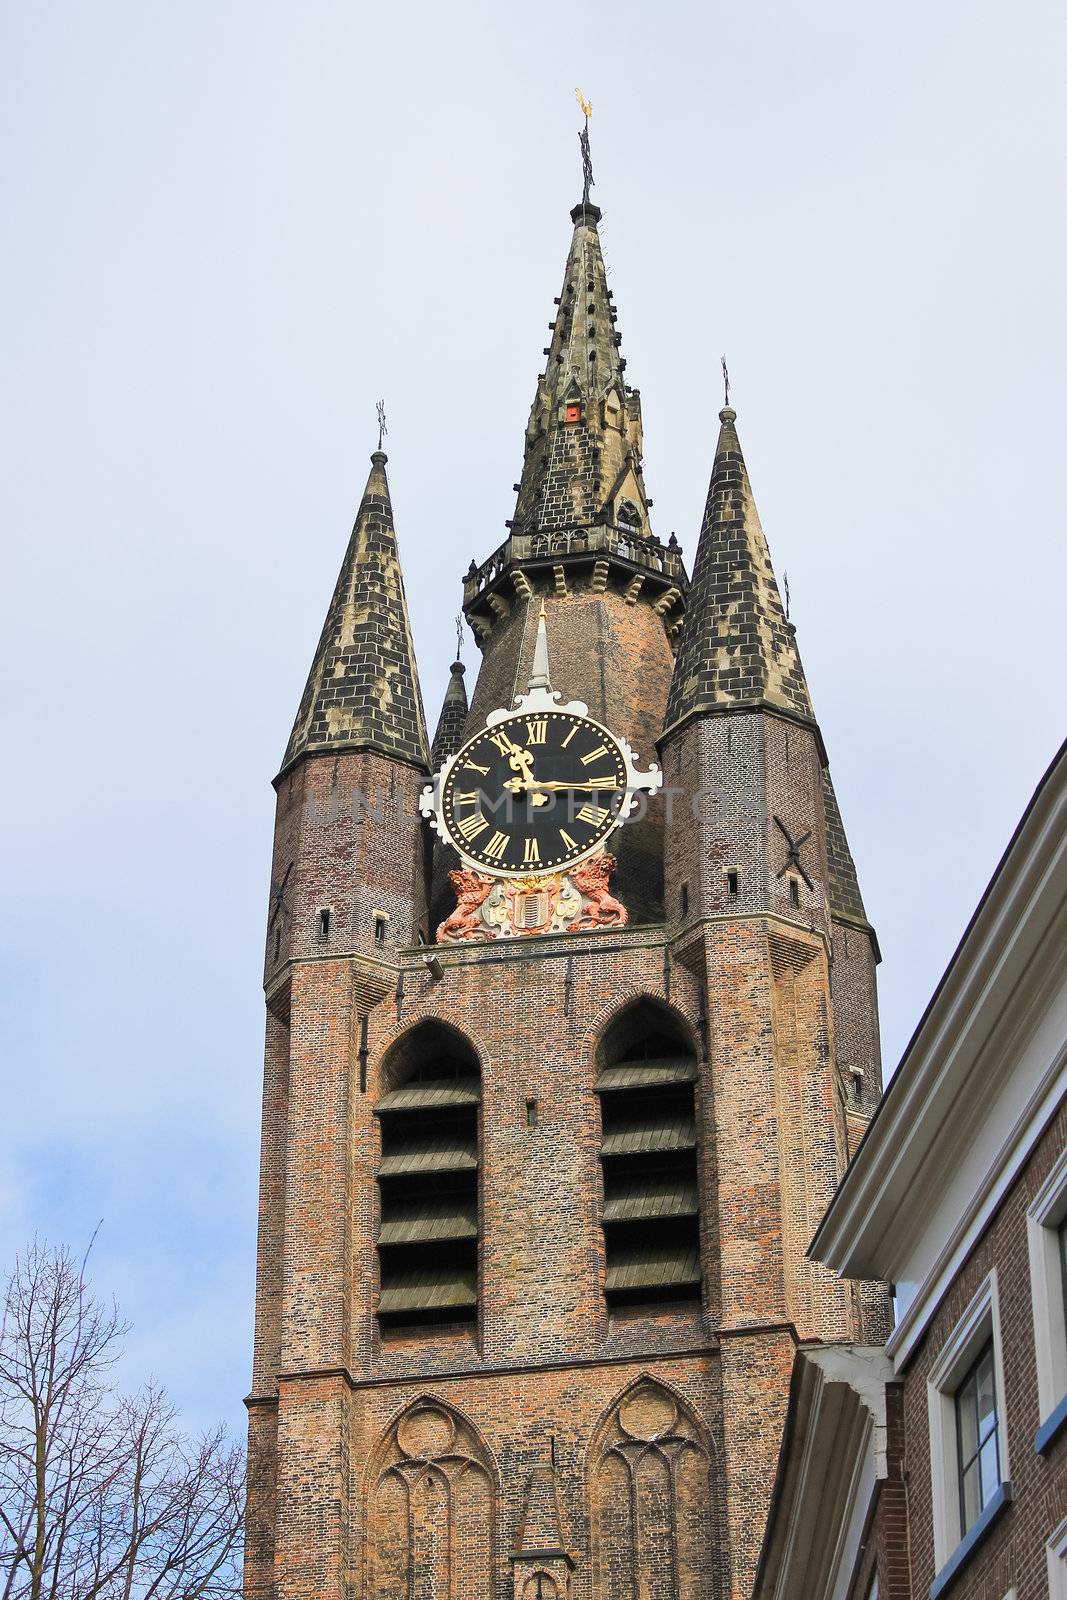 The old church tower in Delft. Netherlands